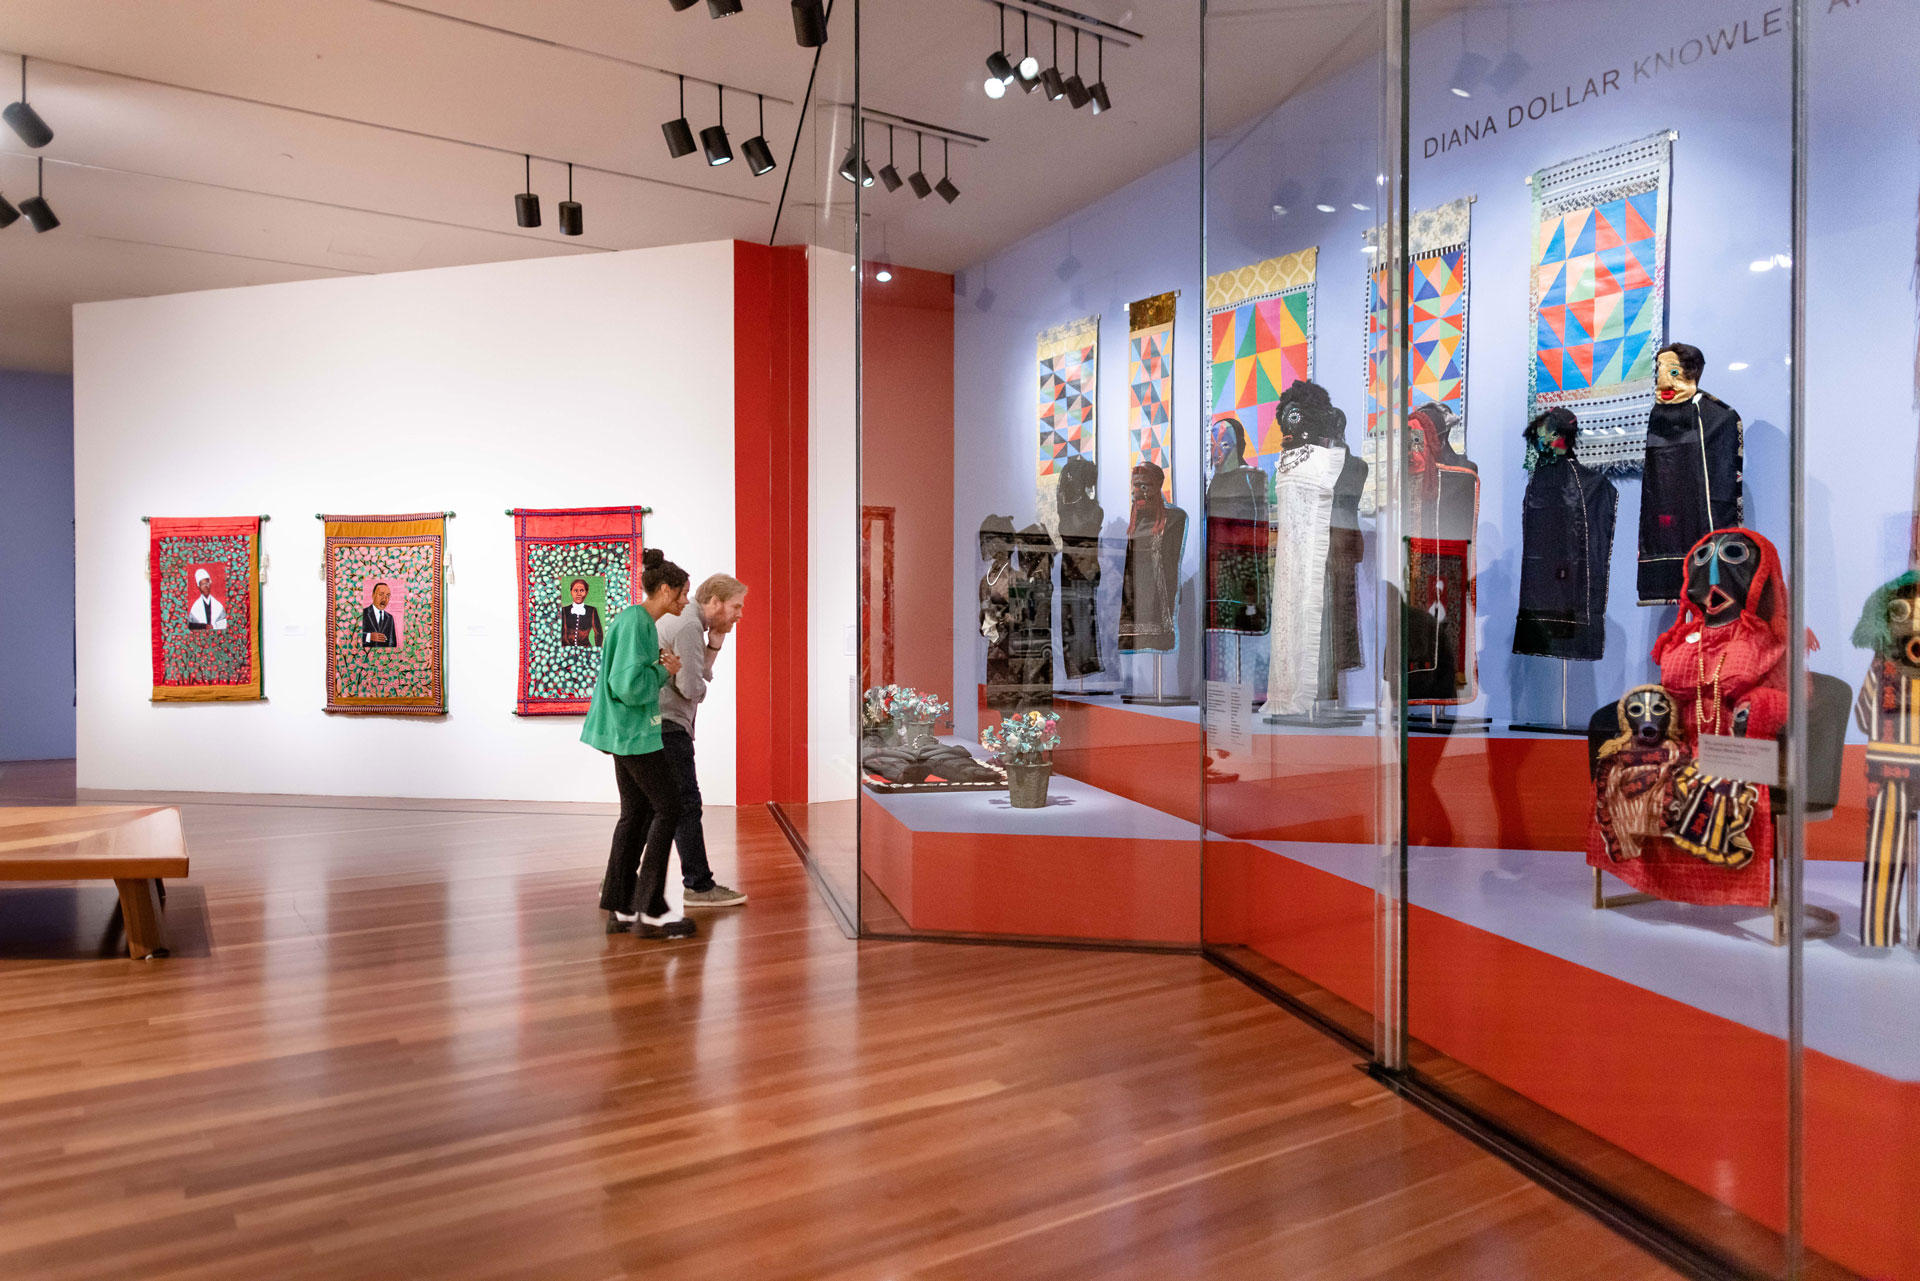 Gallery view with glass-enclosed space of life-sized sewn figures.